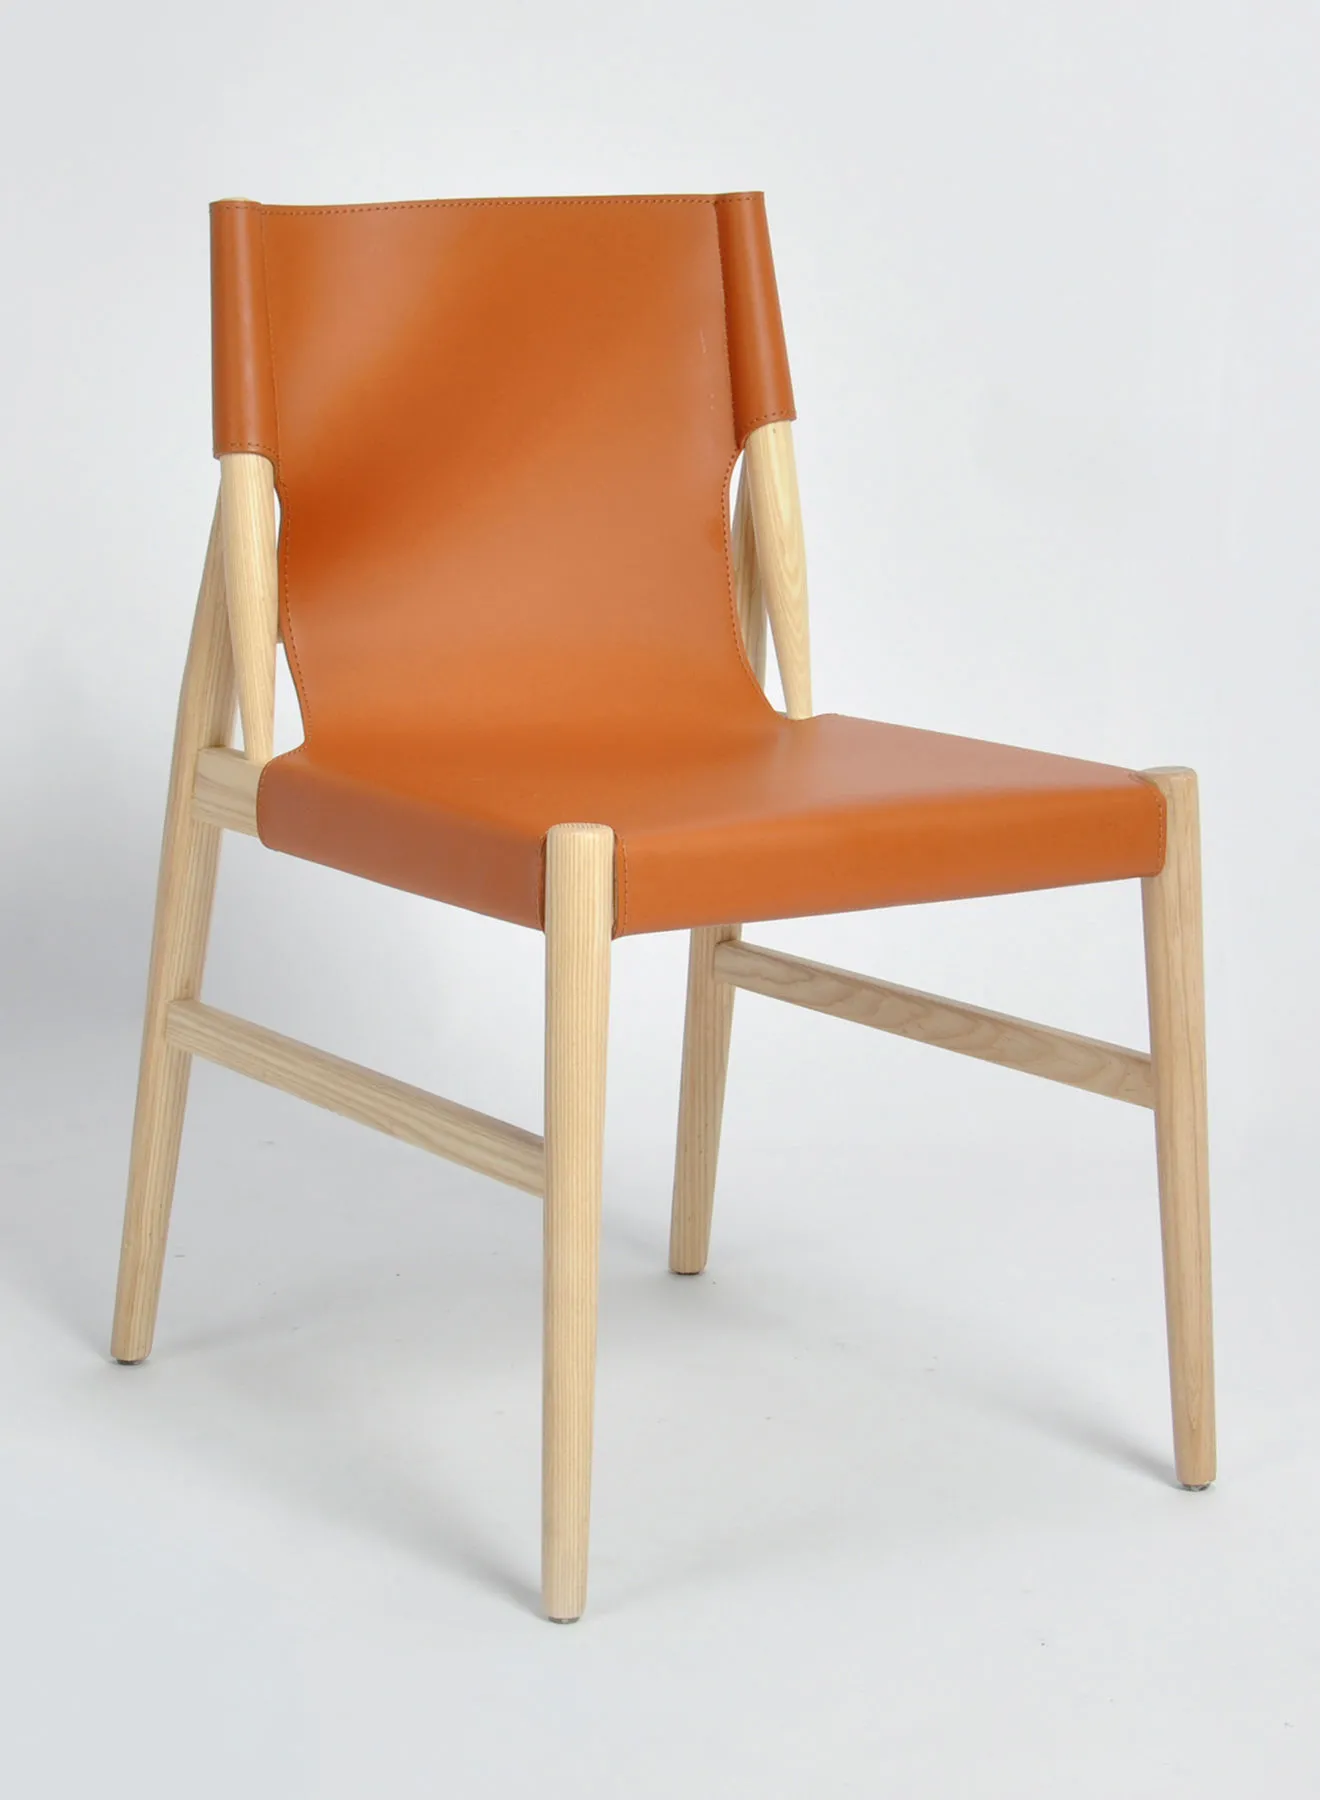 Switch Dining Chair In Brown Wooden Chair Size 46 X 58 X 79